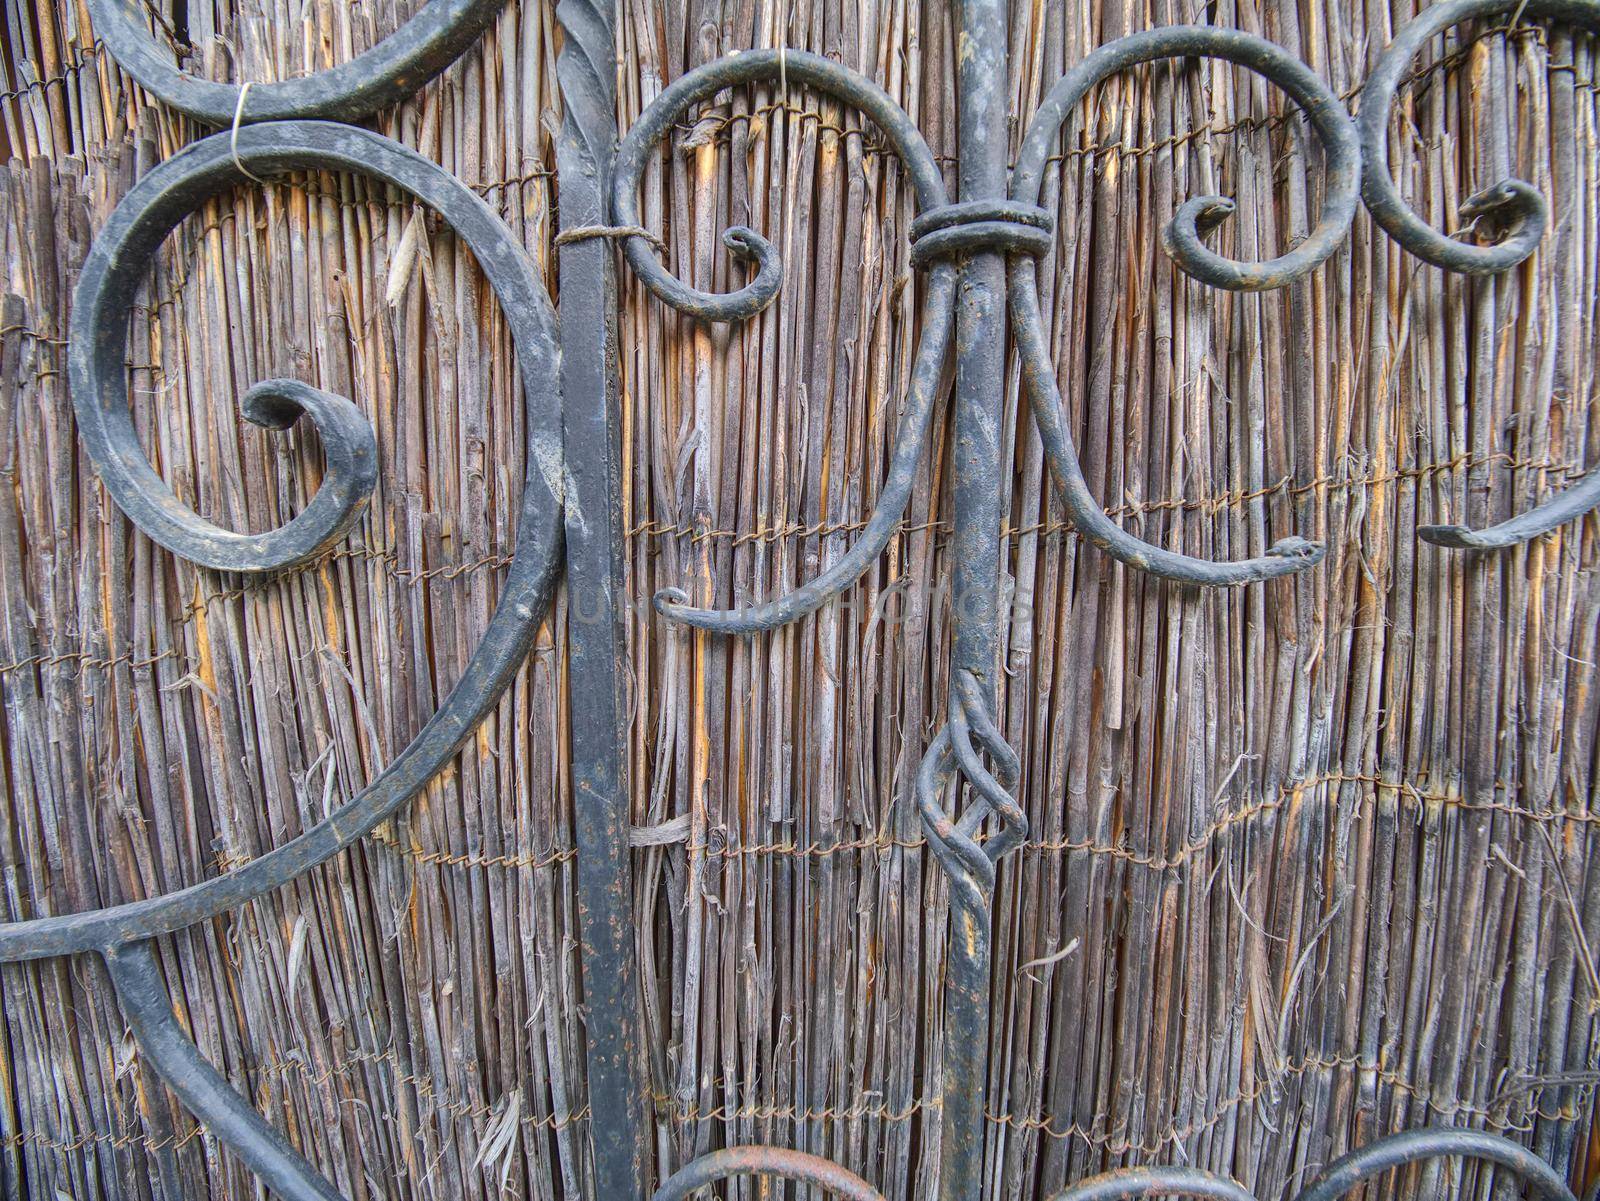 Simple ornaments in fence, wrought-iron gate. Traditional ornamental forging